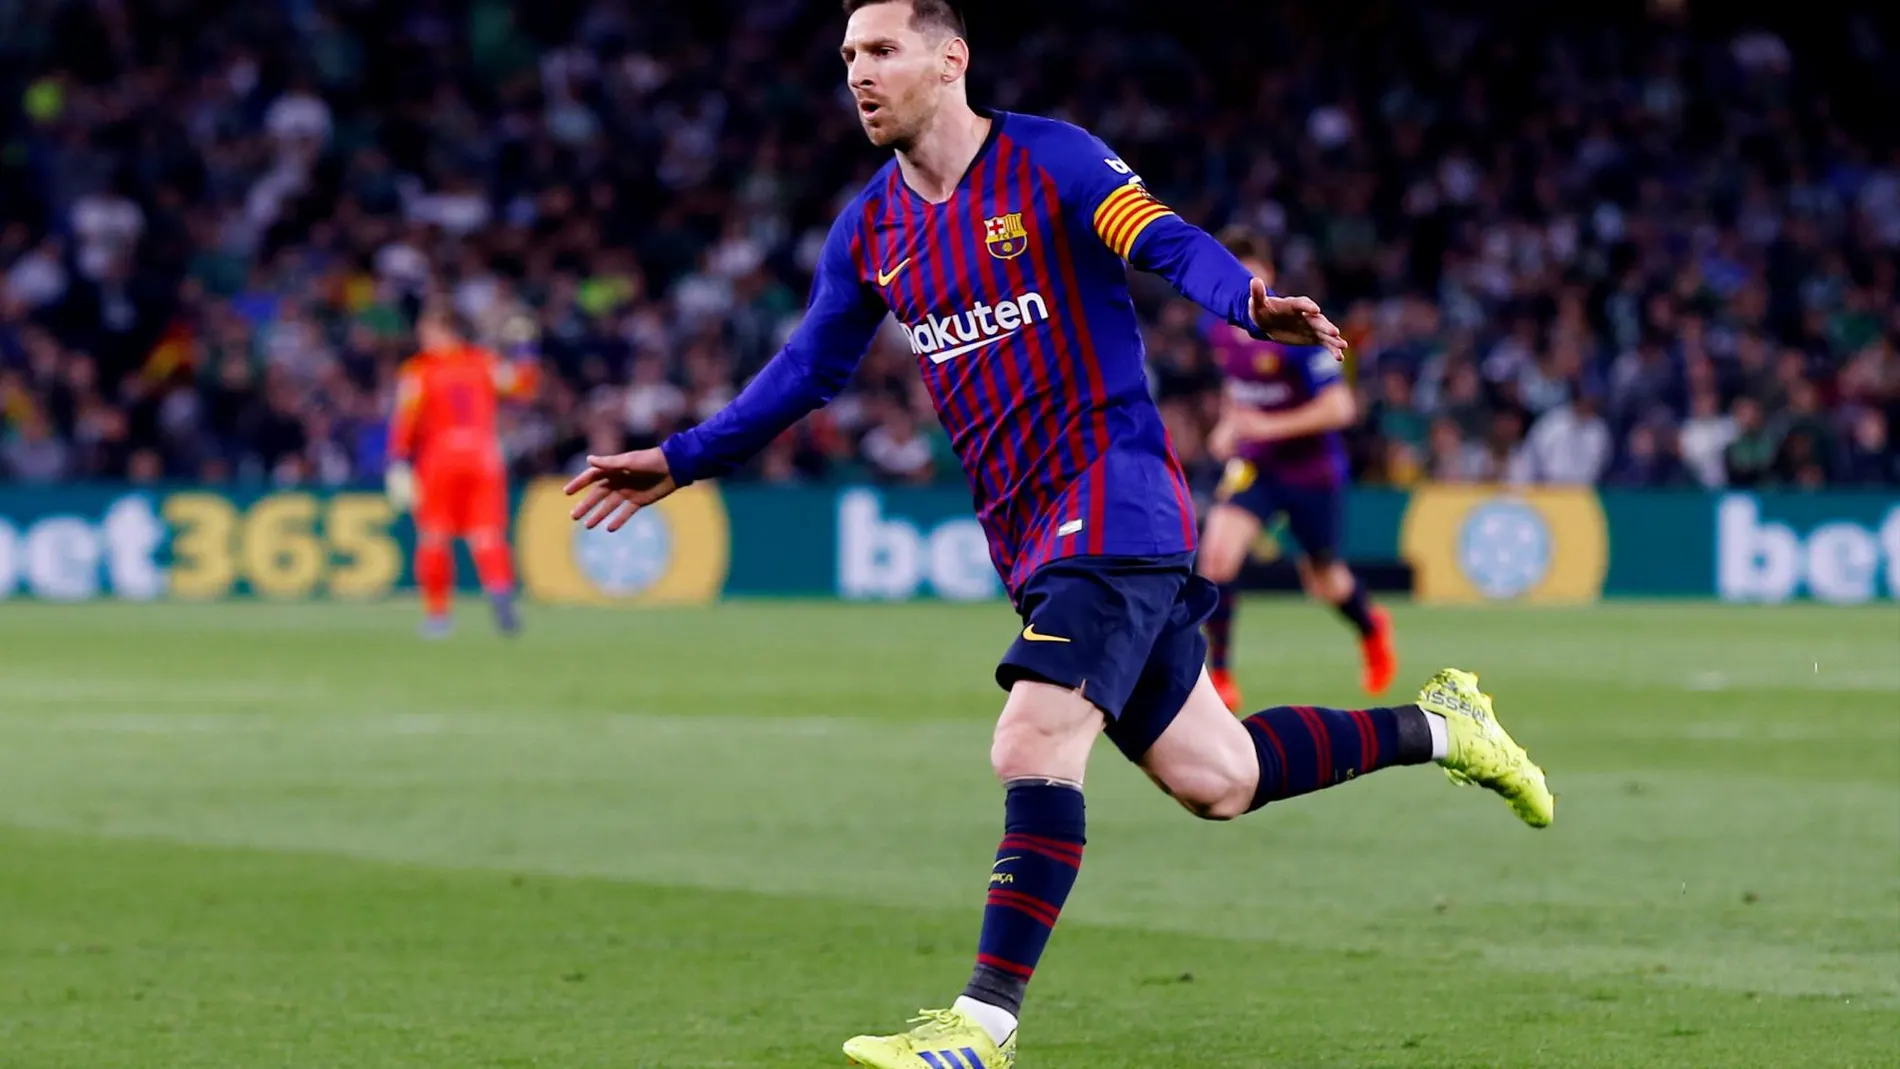 Seville, Spain - March 17, 2019 Barcelona's Lionel Messi celebrates scoring their first goal